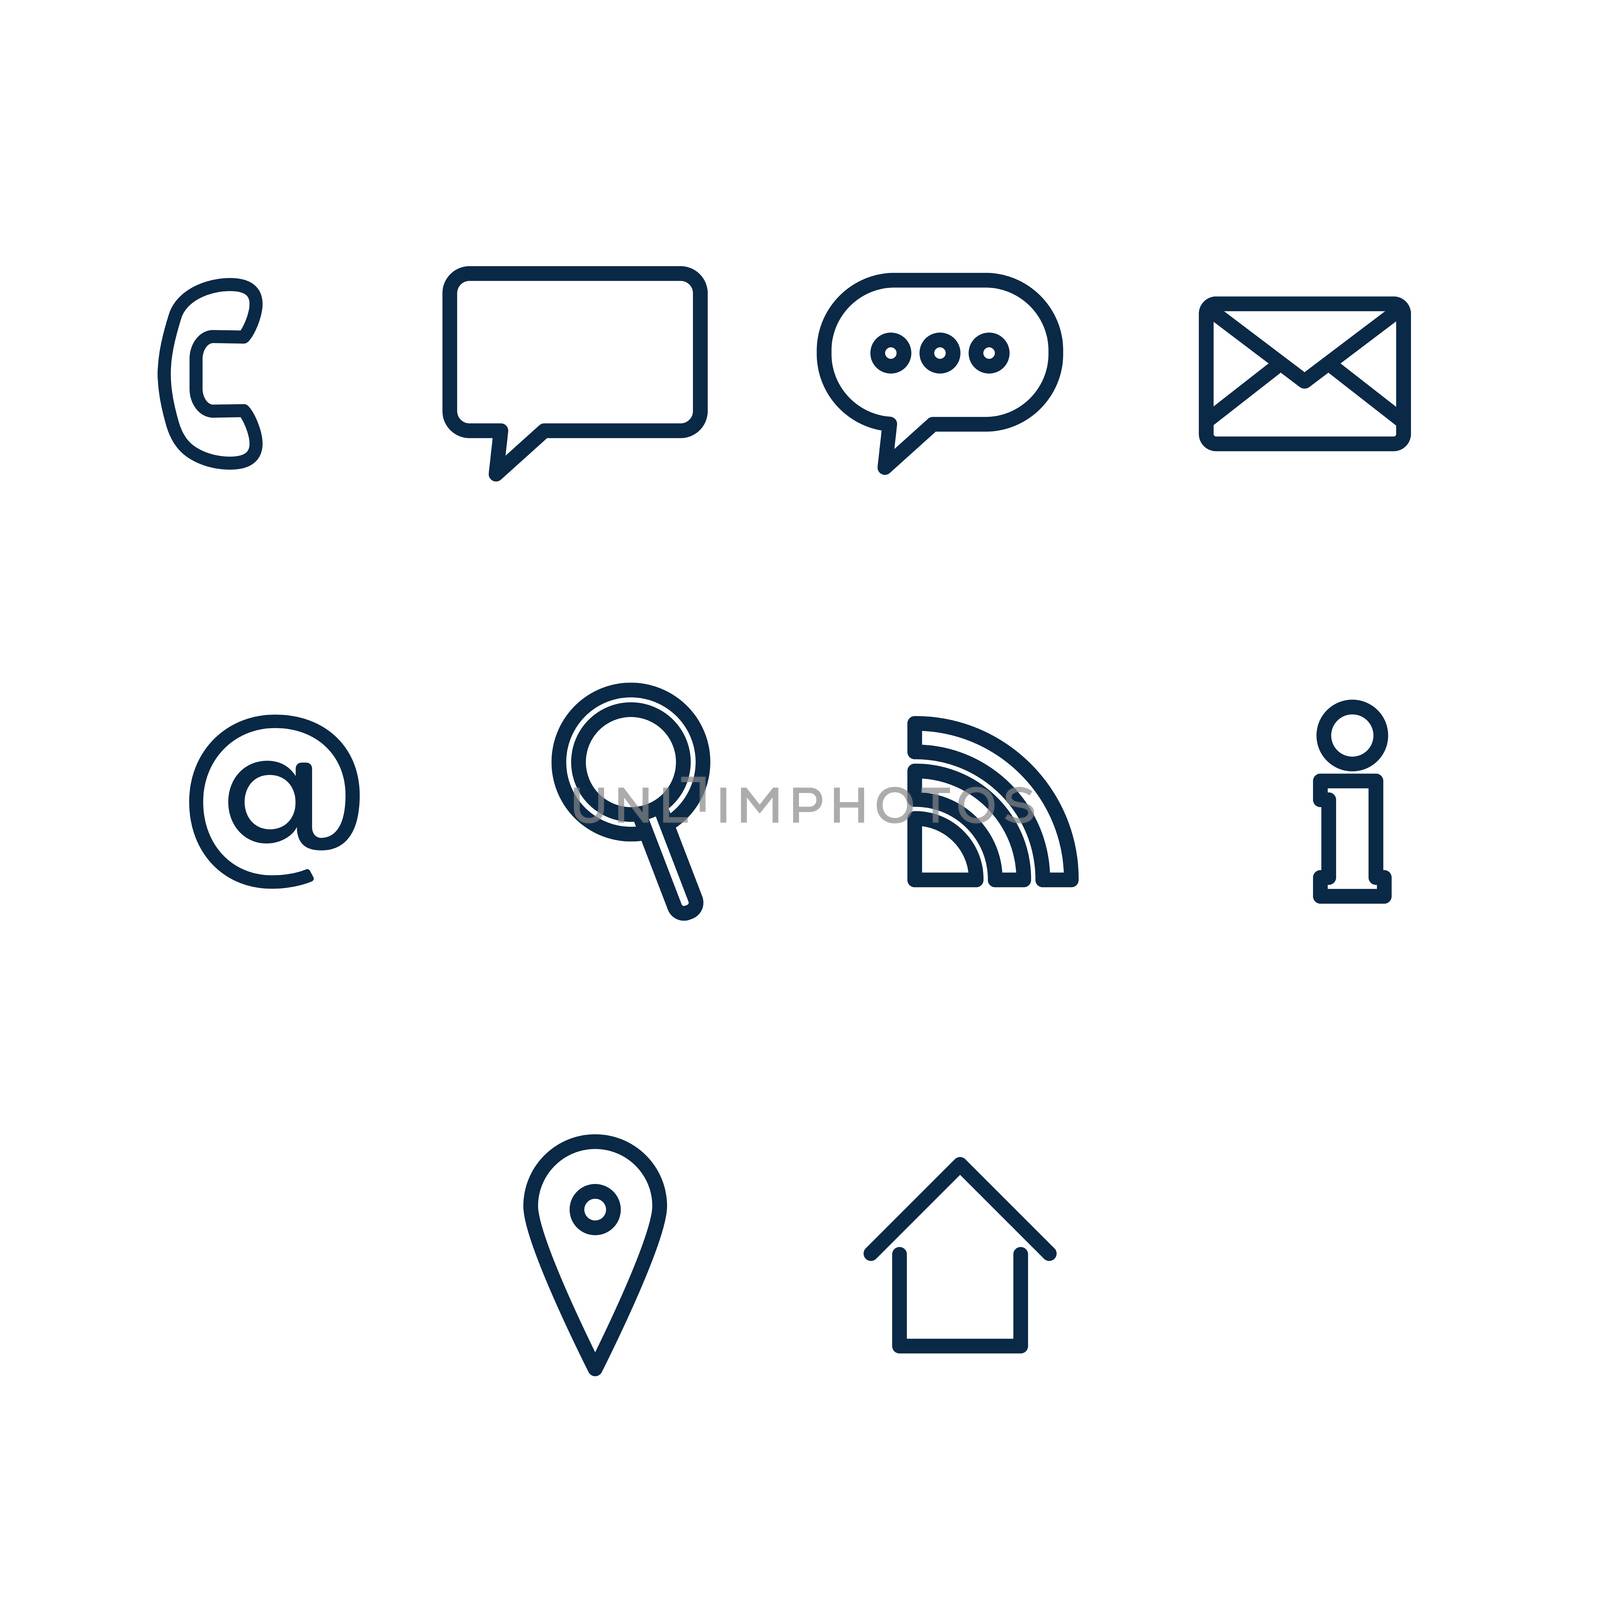 Vector icon set for communication by Wavebreakmedia